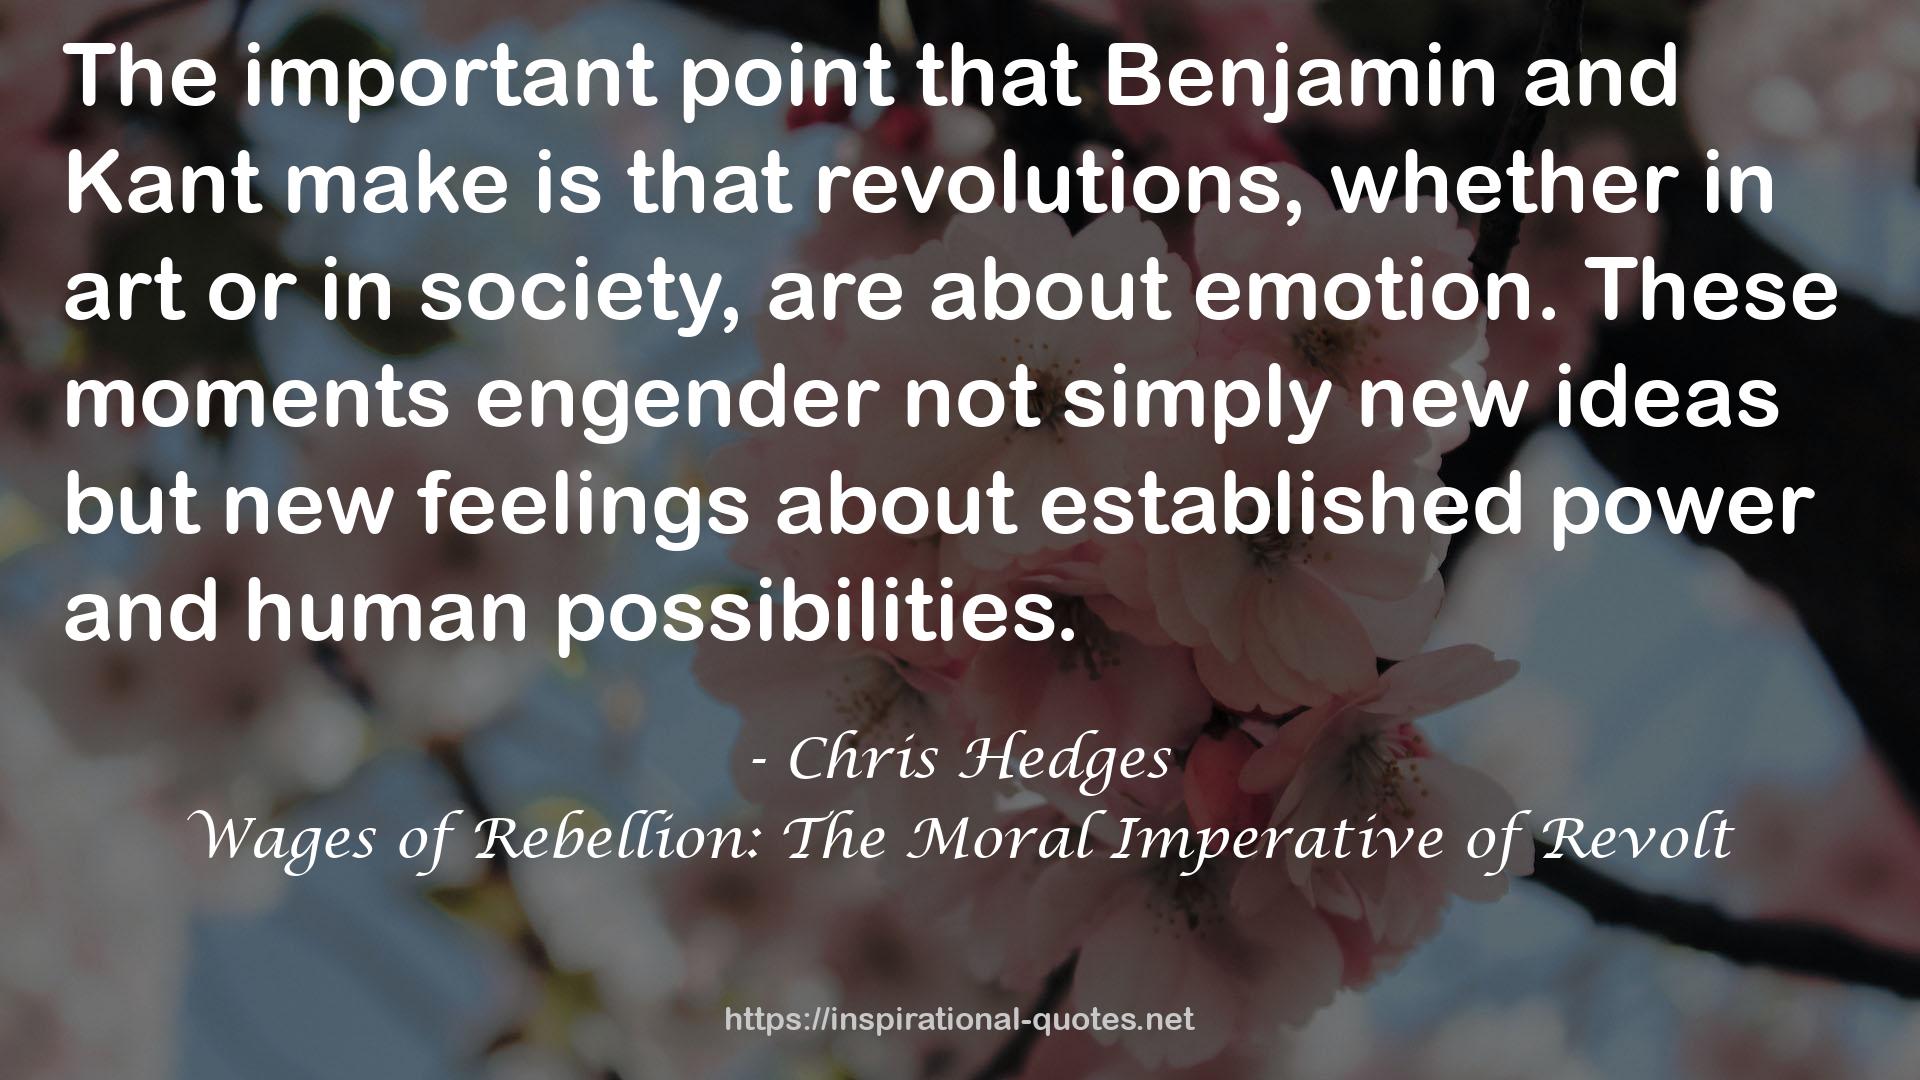 Wages of Rebellion: The Moral Imperative of Revolt QUOTES